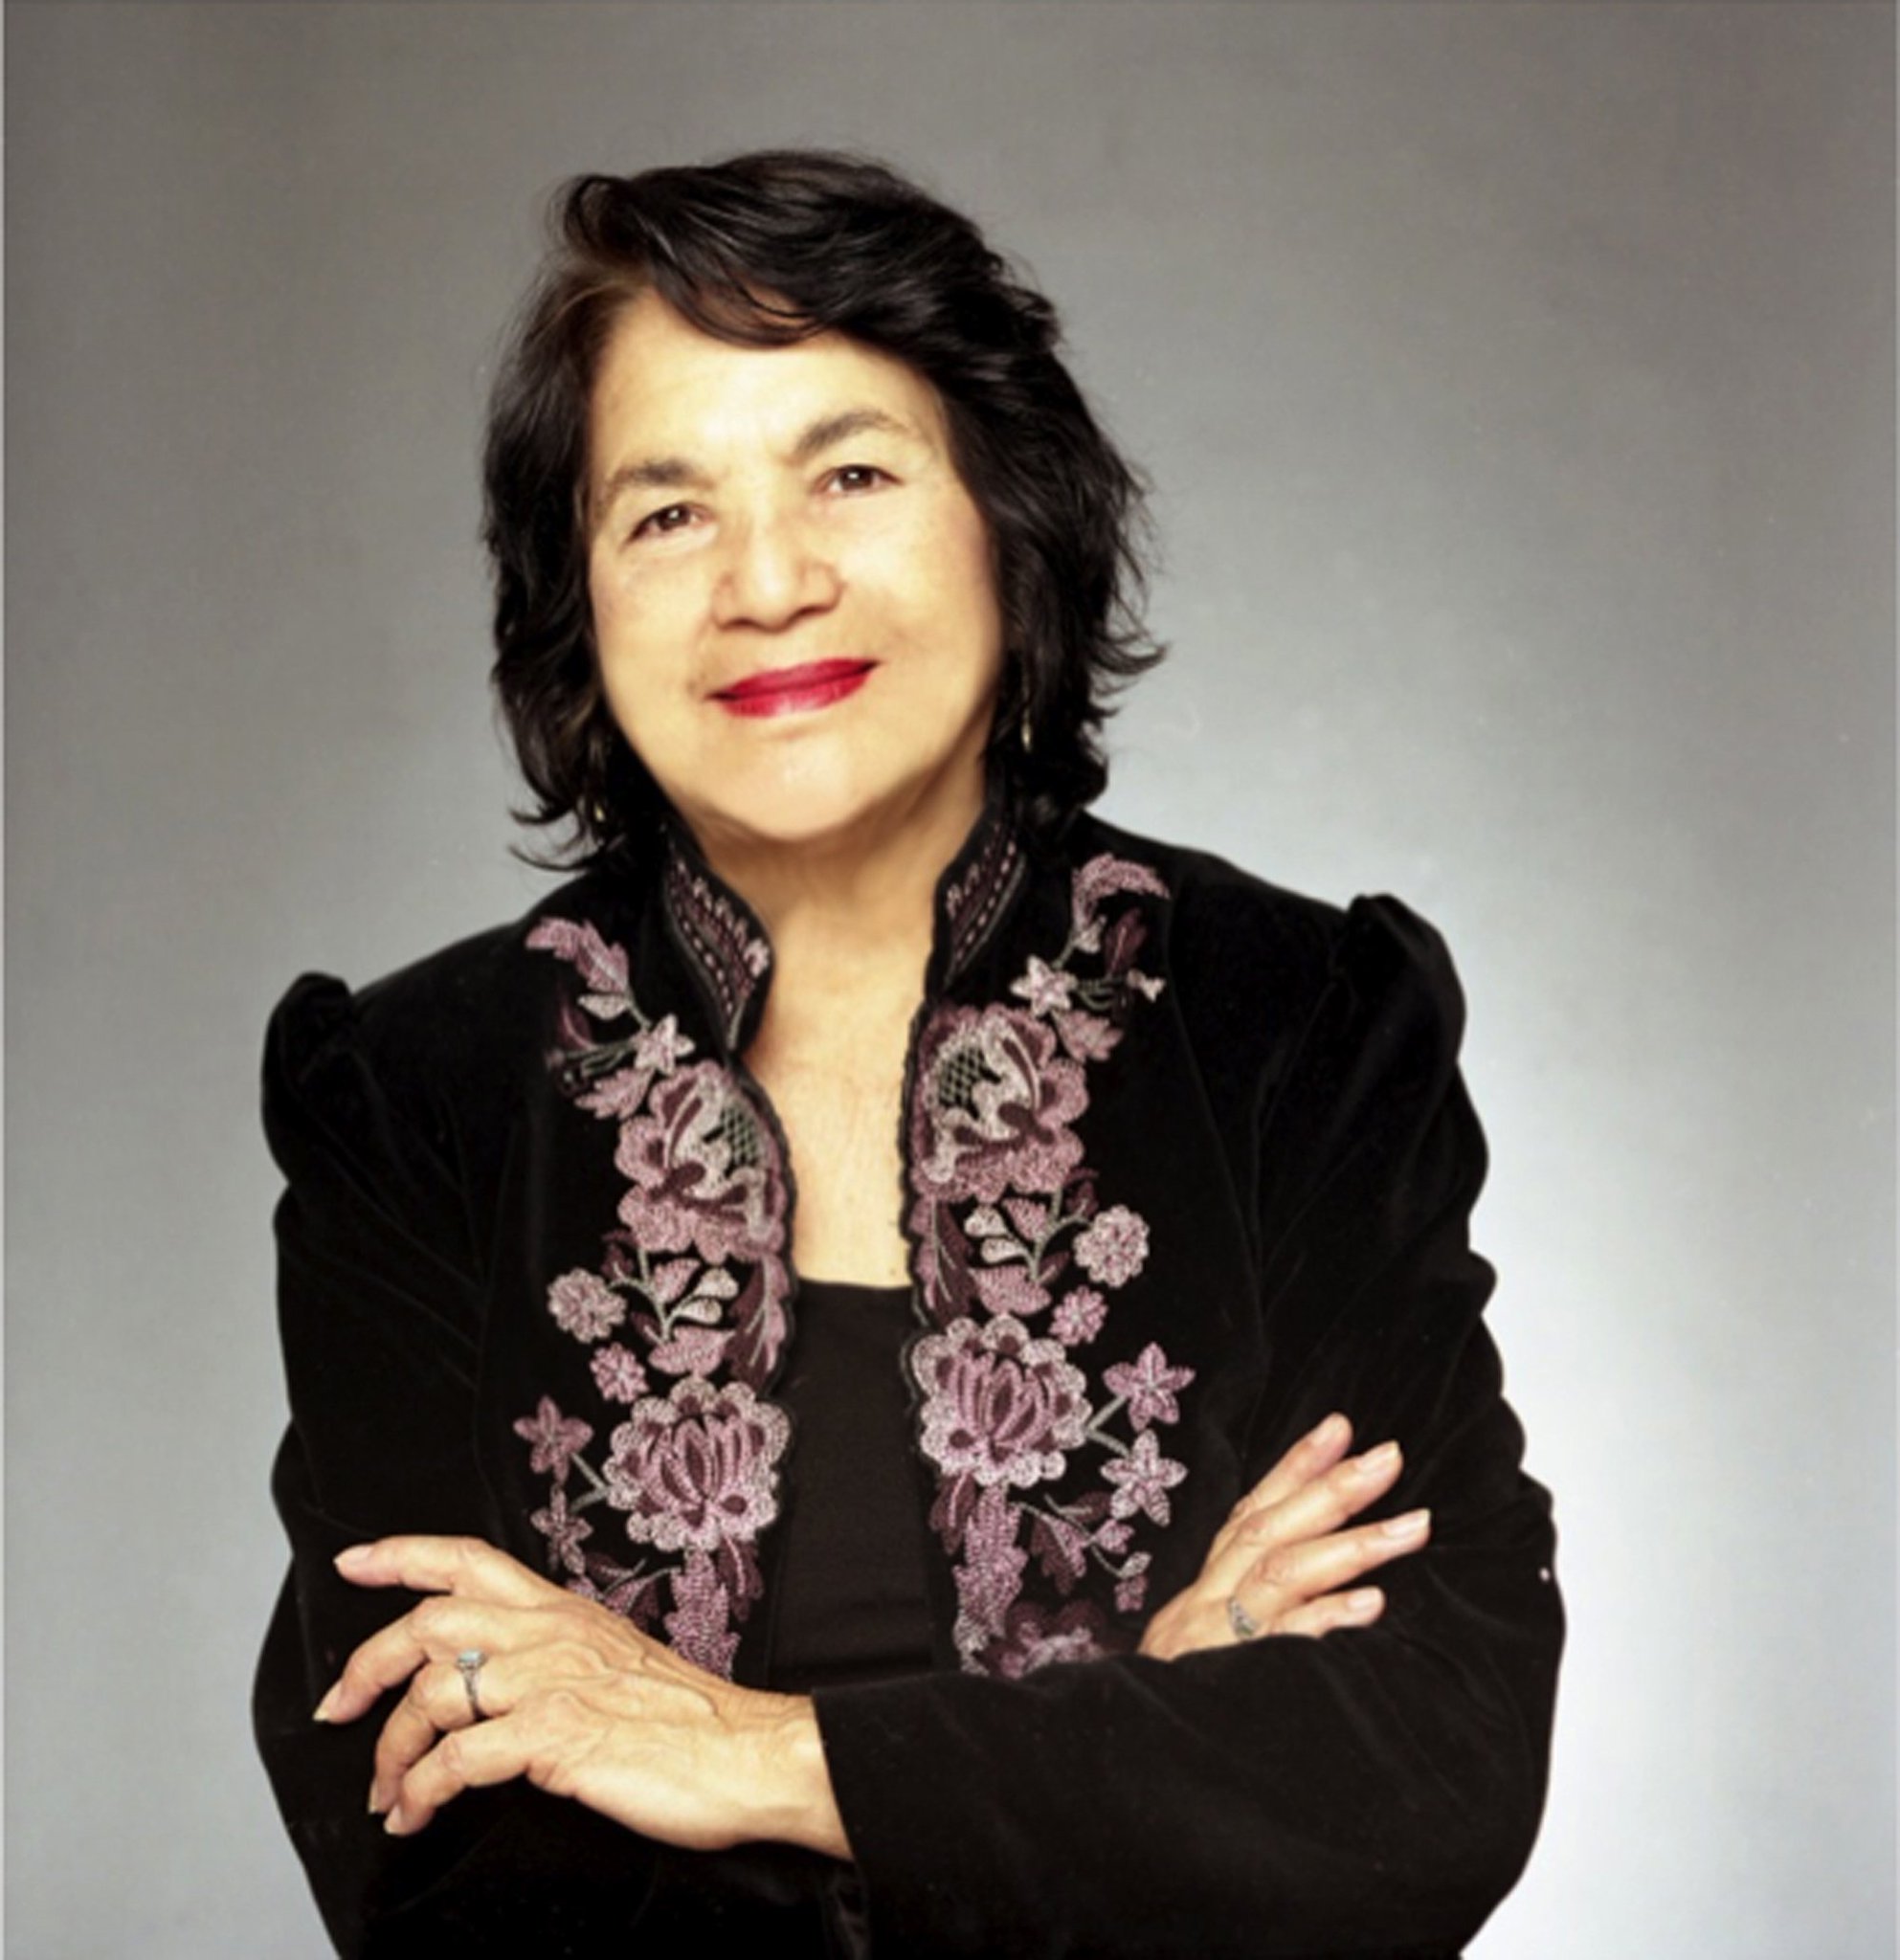 Happy Birthday to Latina Civil Rights Leader, Dolores Huerta - Thank you for leading the way. 